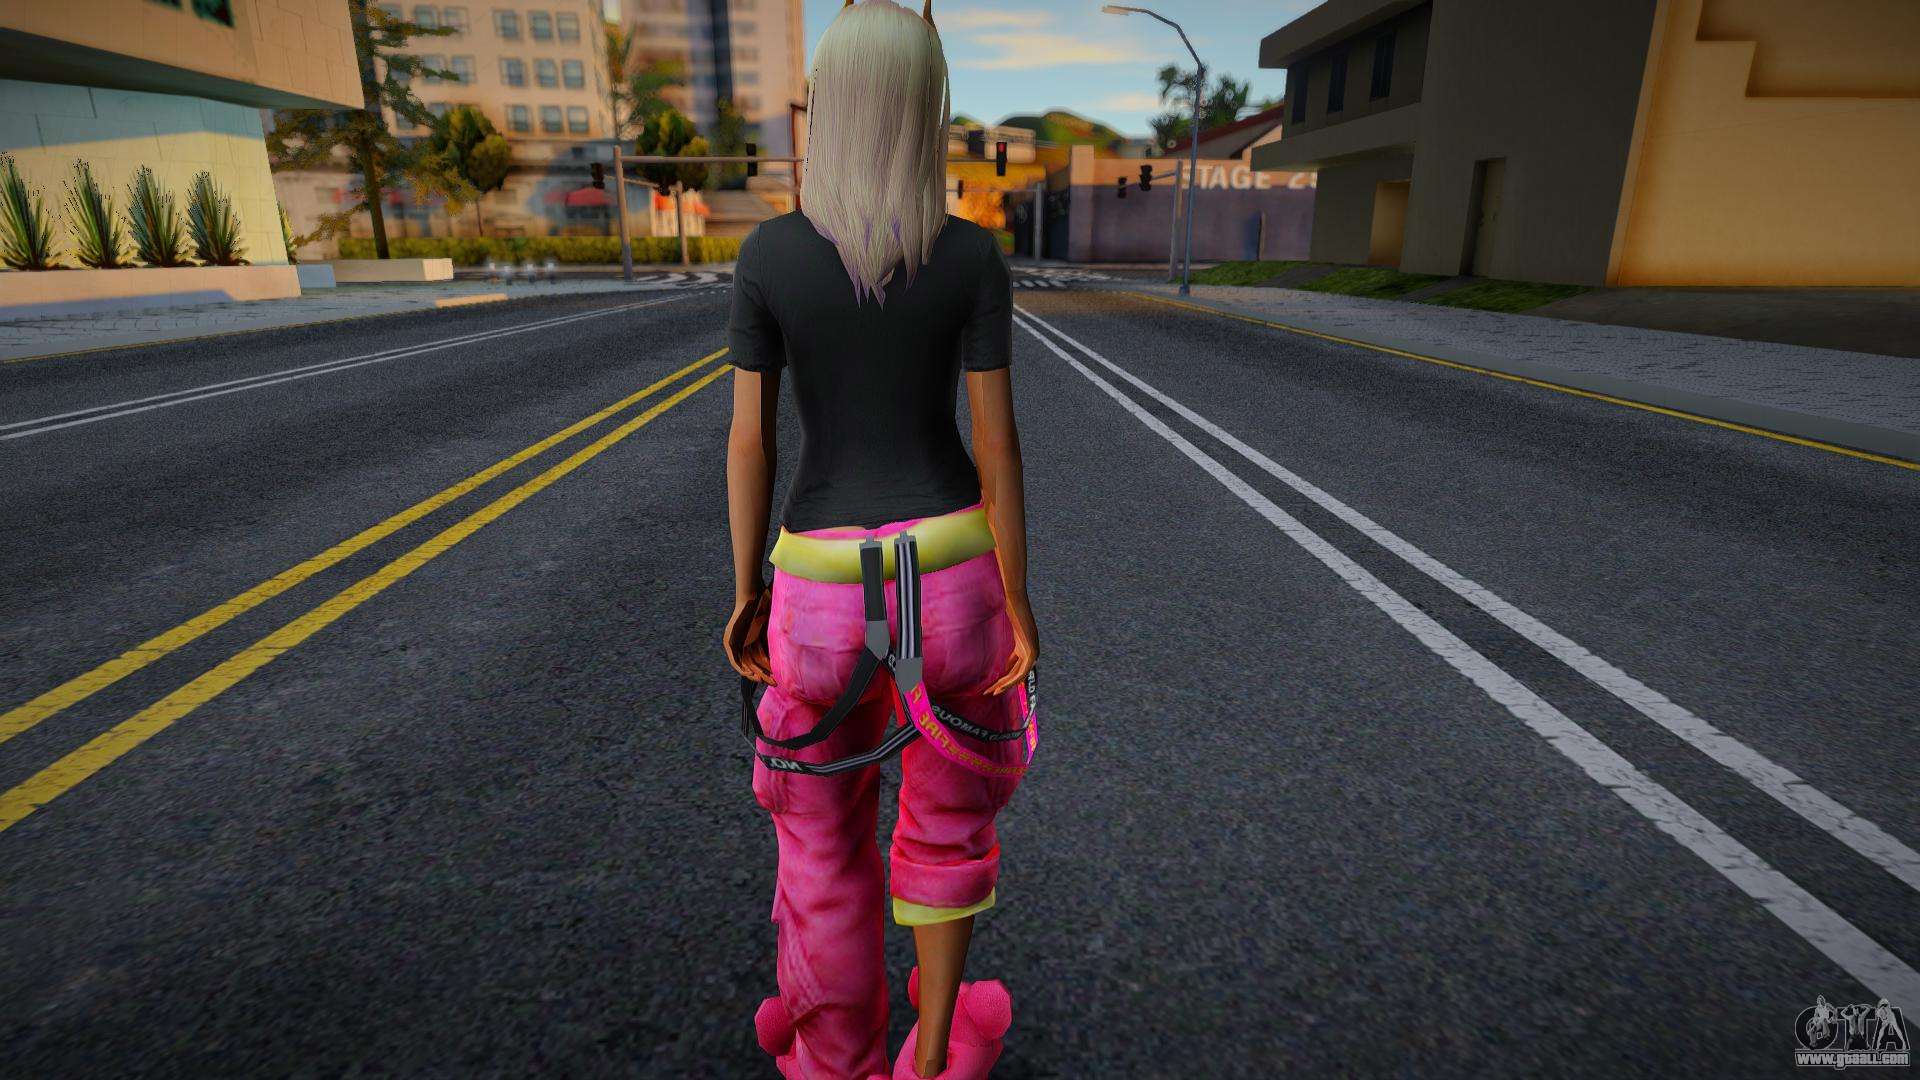 Download Male skins from Free Fire for GTA San Andreas (iOS, Android)